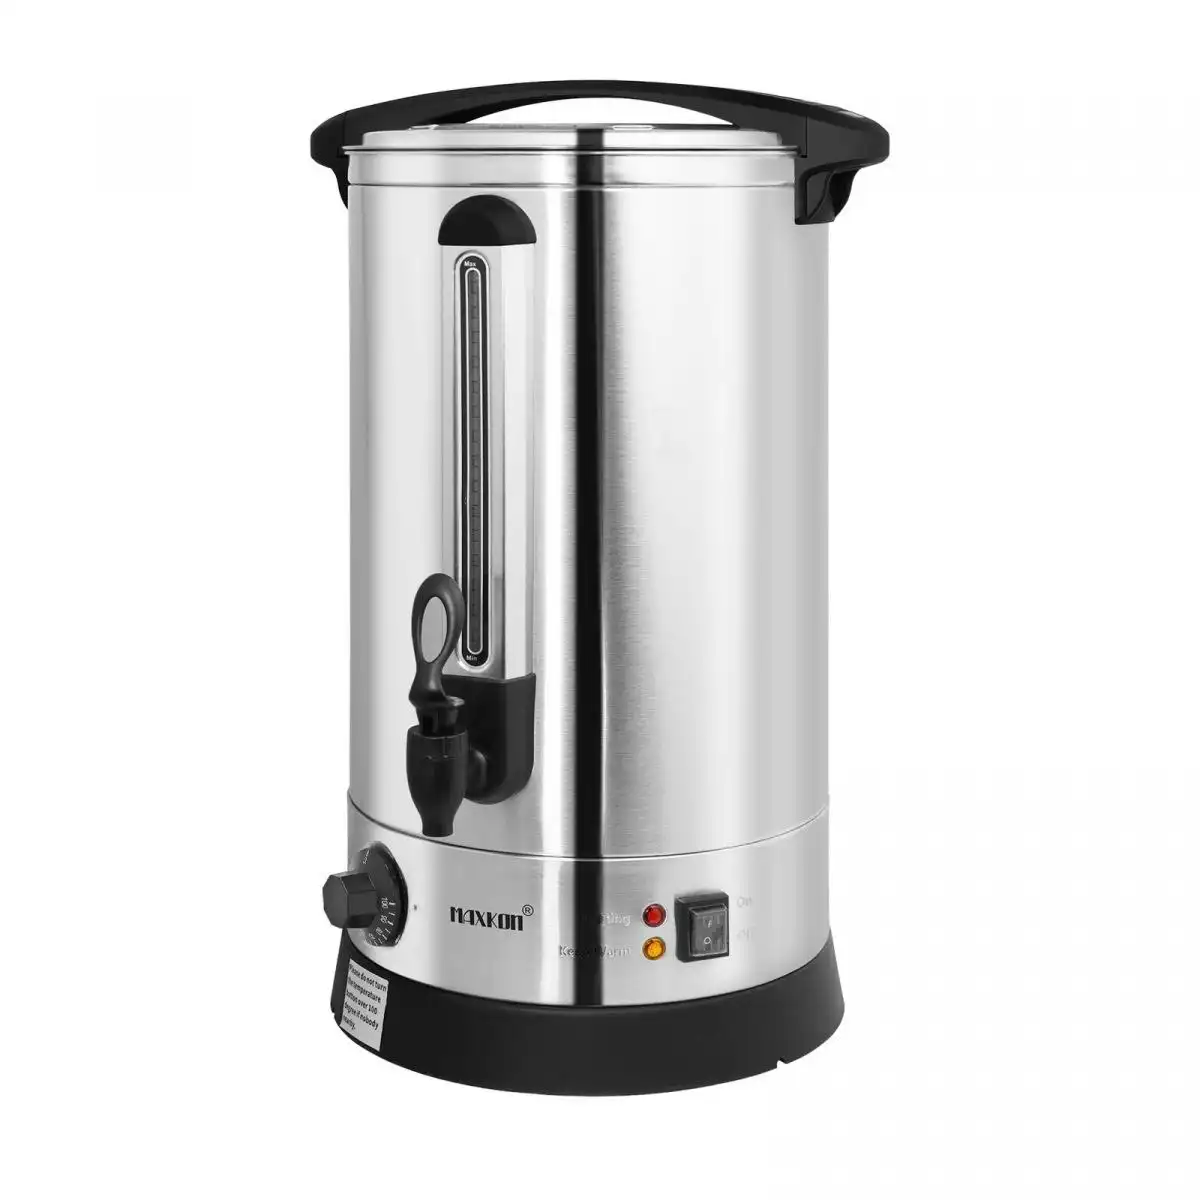 Maxkon  17L Water Urn Dispenser Kettle Instant Hot Cold Coffee Tea Maker Machine Home Commercial Camping Boiler Stainless Steel with Tap